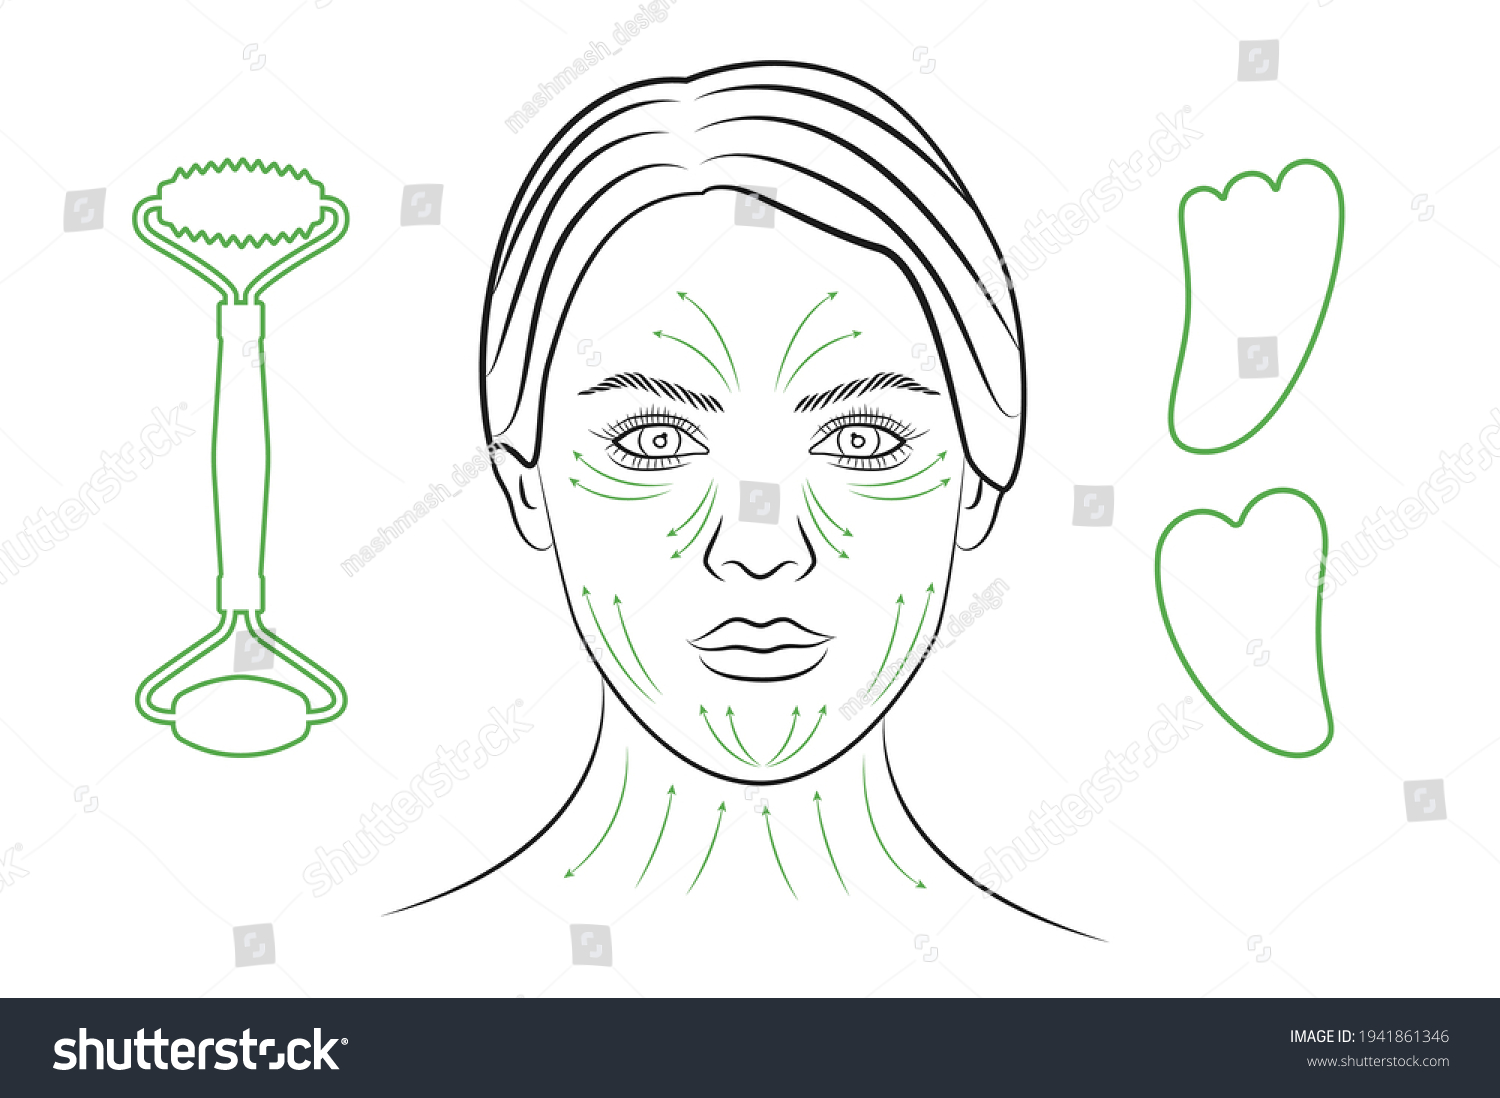 Massage Lines Face Outline Womans Face Stock Vector Royalty Free 1941861346 Shutterstock 